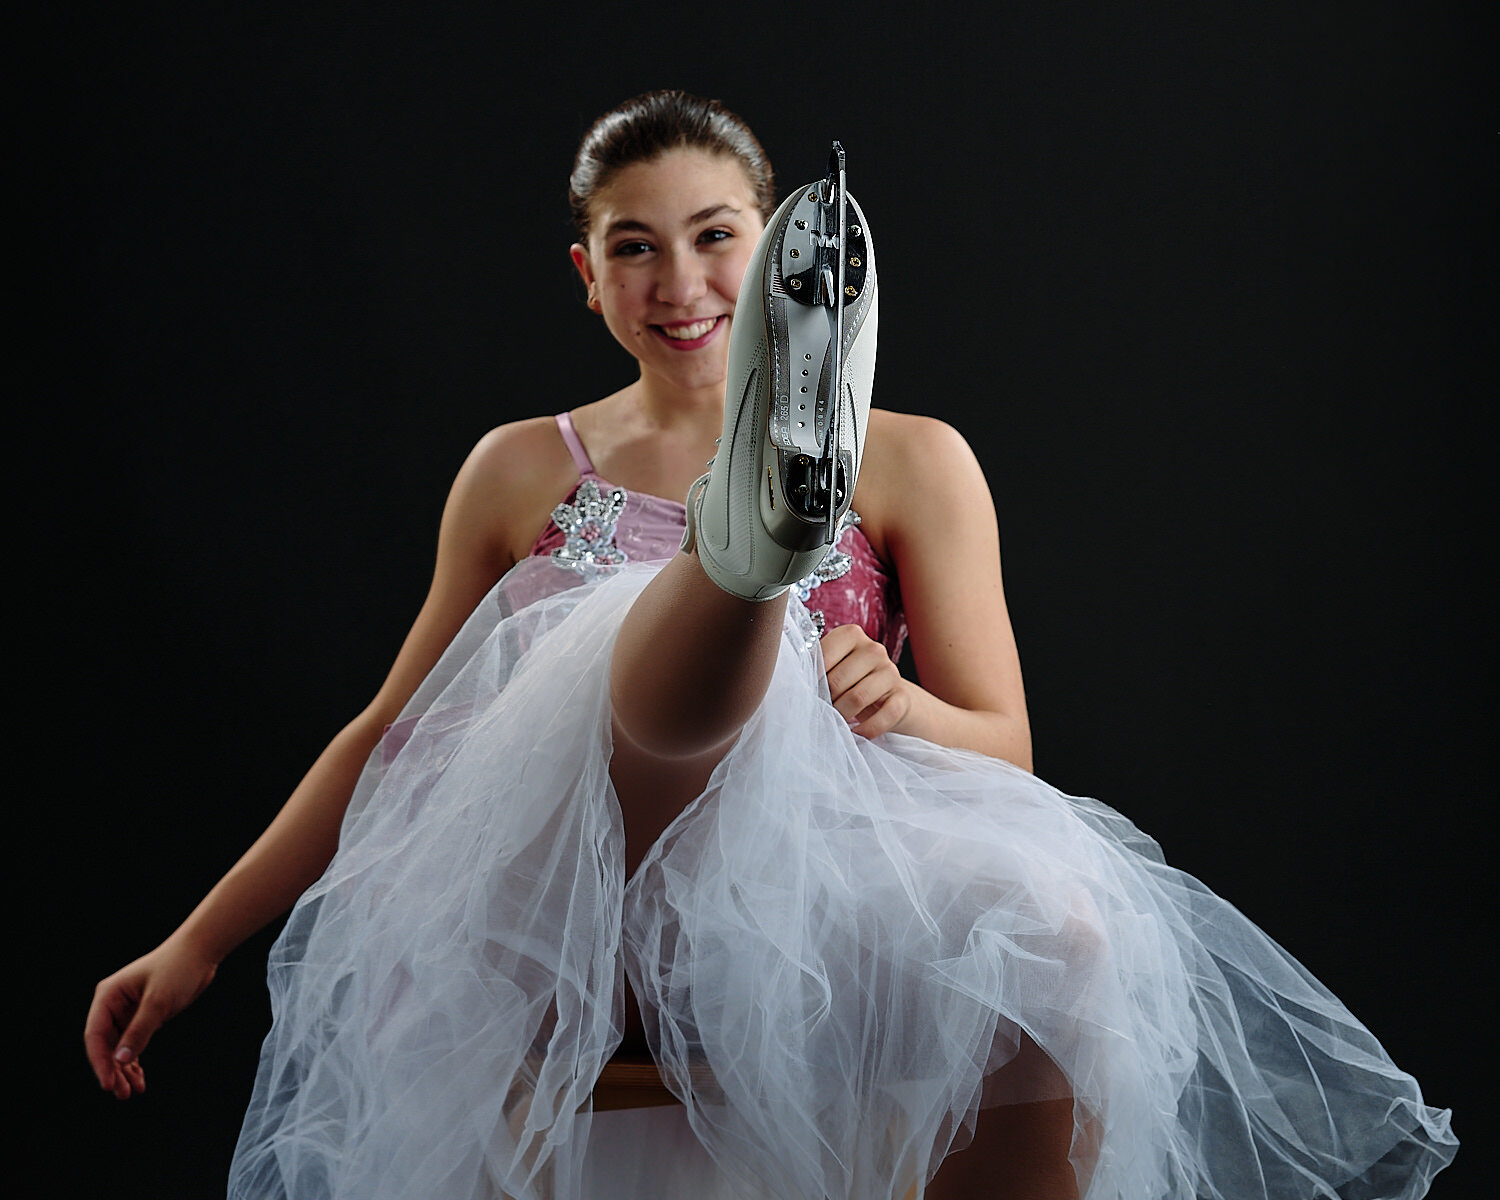  Ella Sanfilippo is posing in her ice skating costumes and made in Italy white skates in a professional photography studio against a black background. She has an athletic body and a beautiful face. 